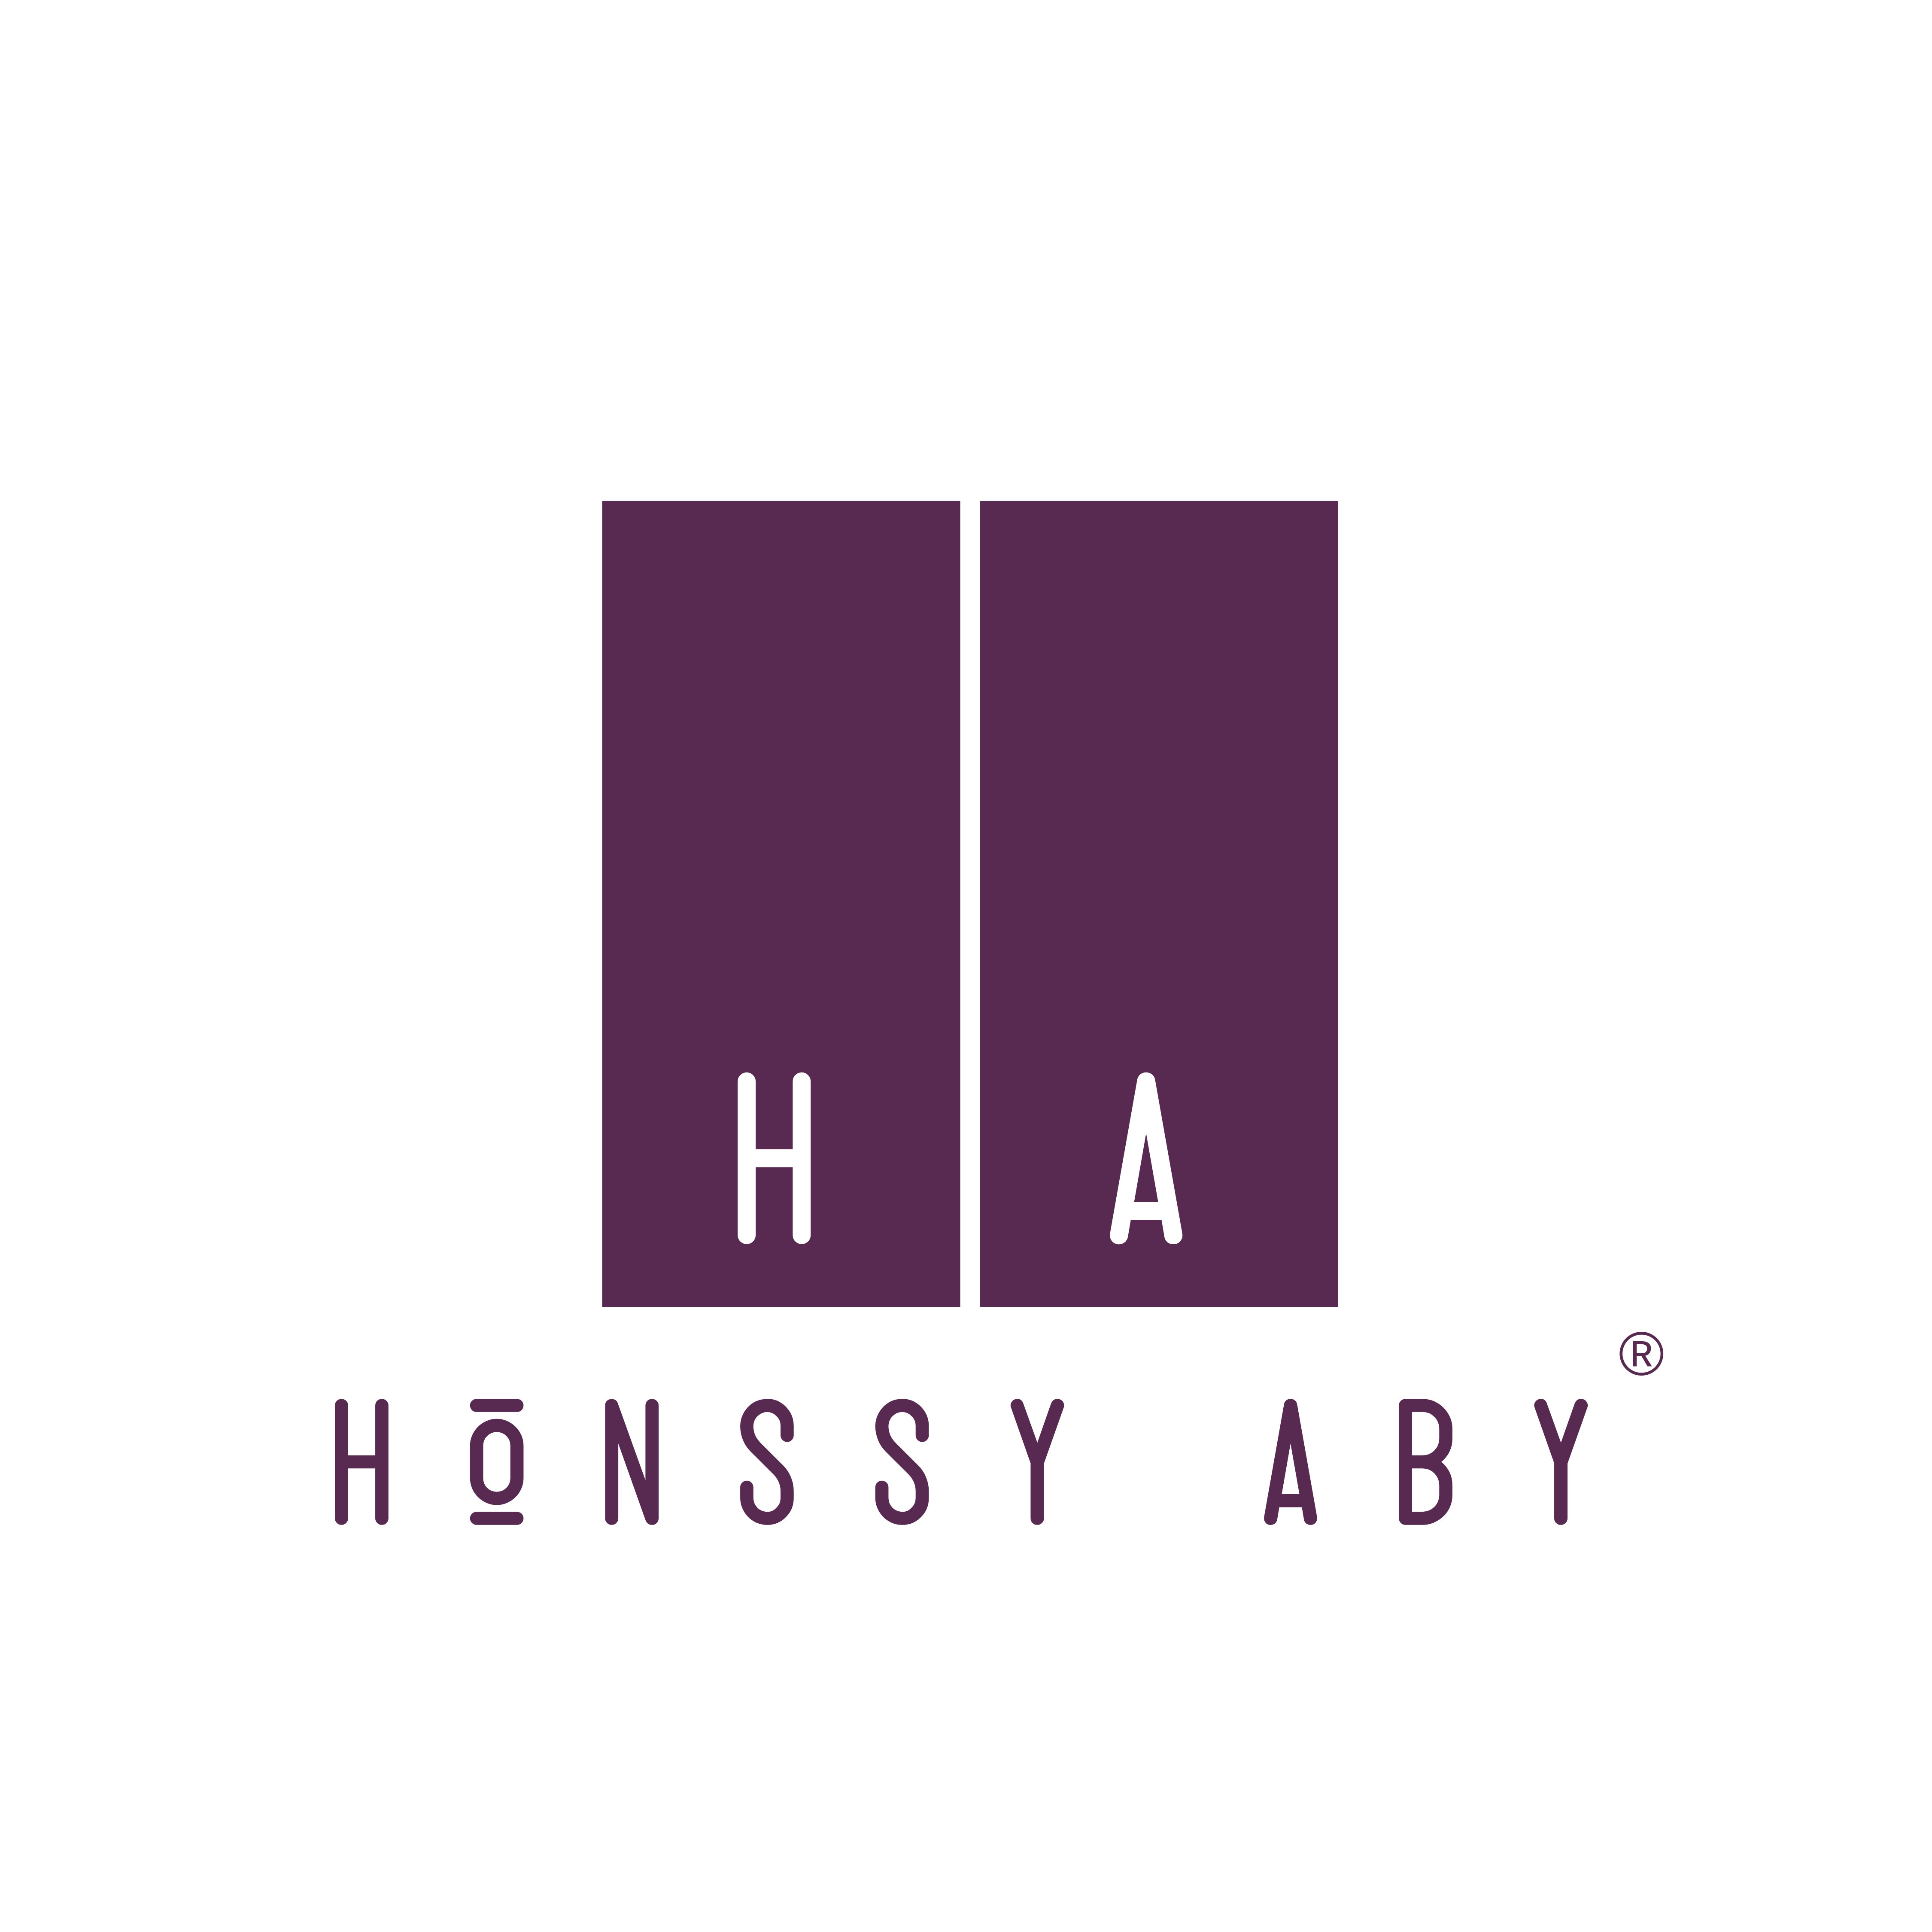 Honssy Aby - Official Website